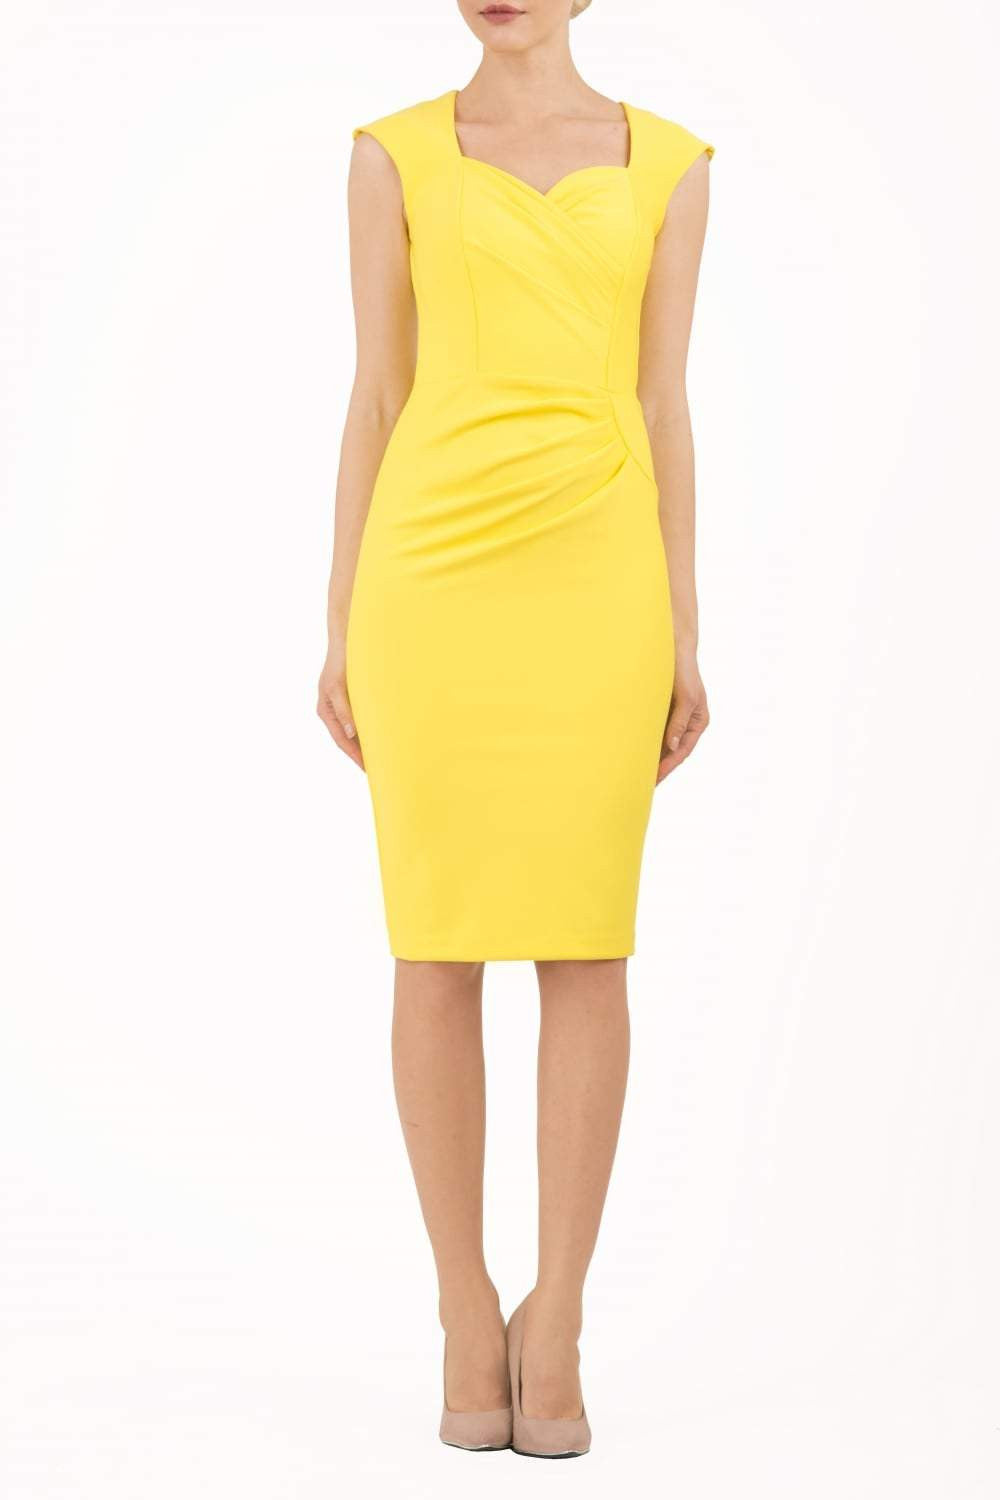 blonde model is wearing diva catwalk vivian sleeveless pencil skirt dress with overlapped bust area and lowered neckline in blazing yellow colour front